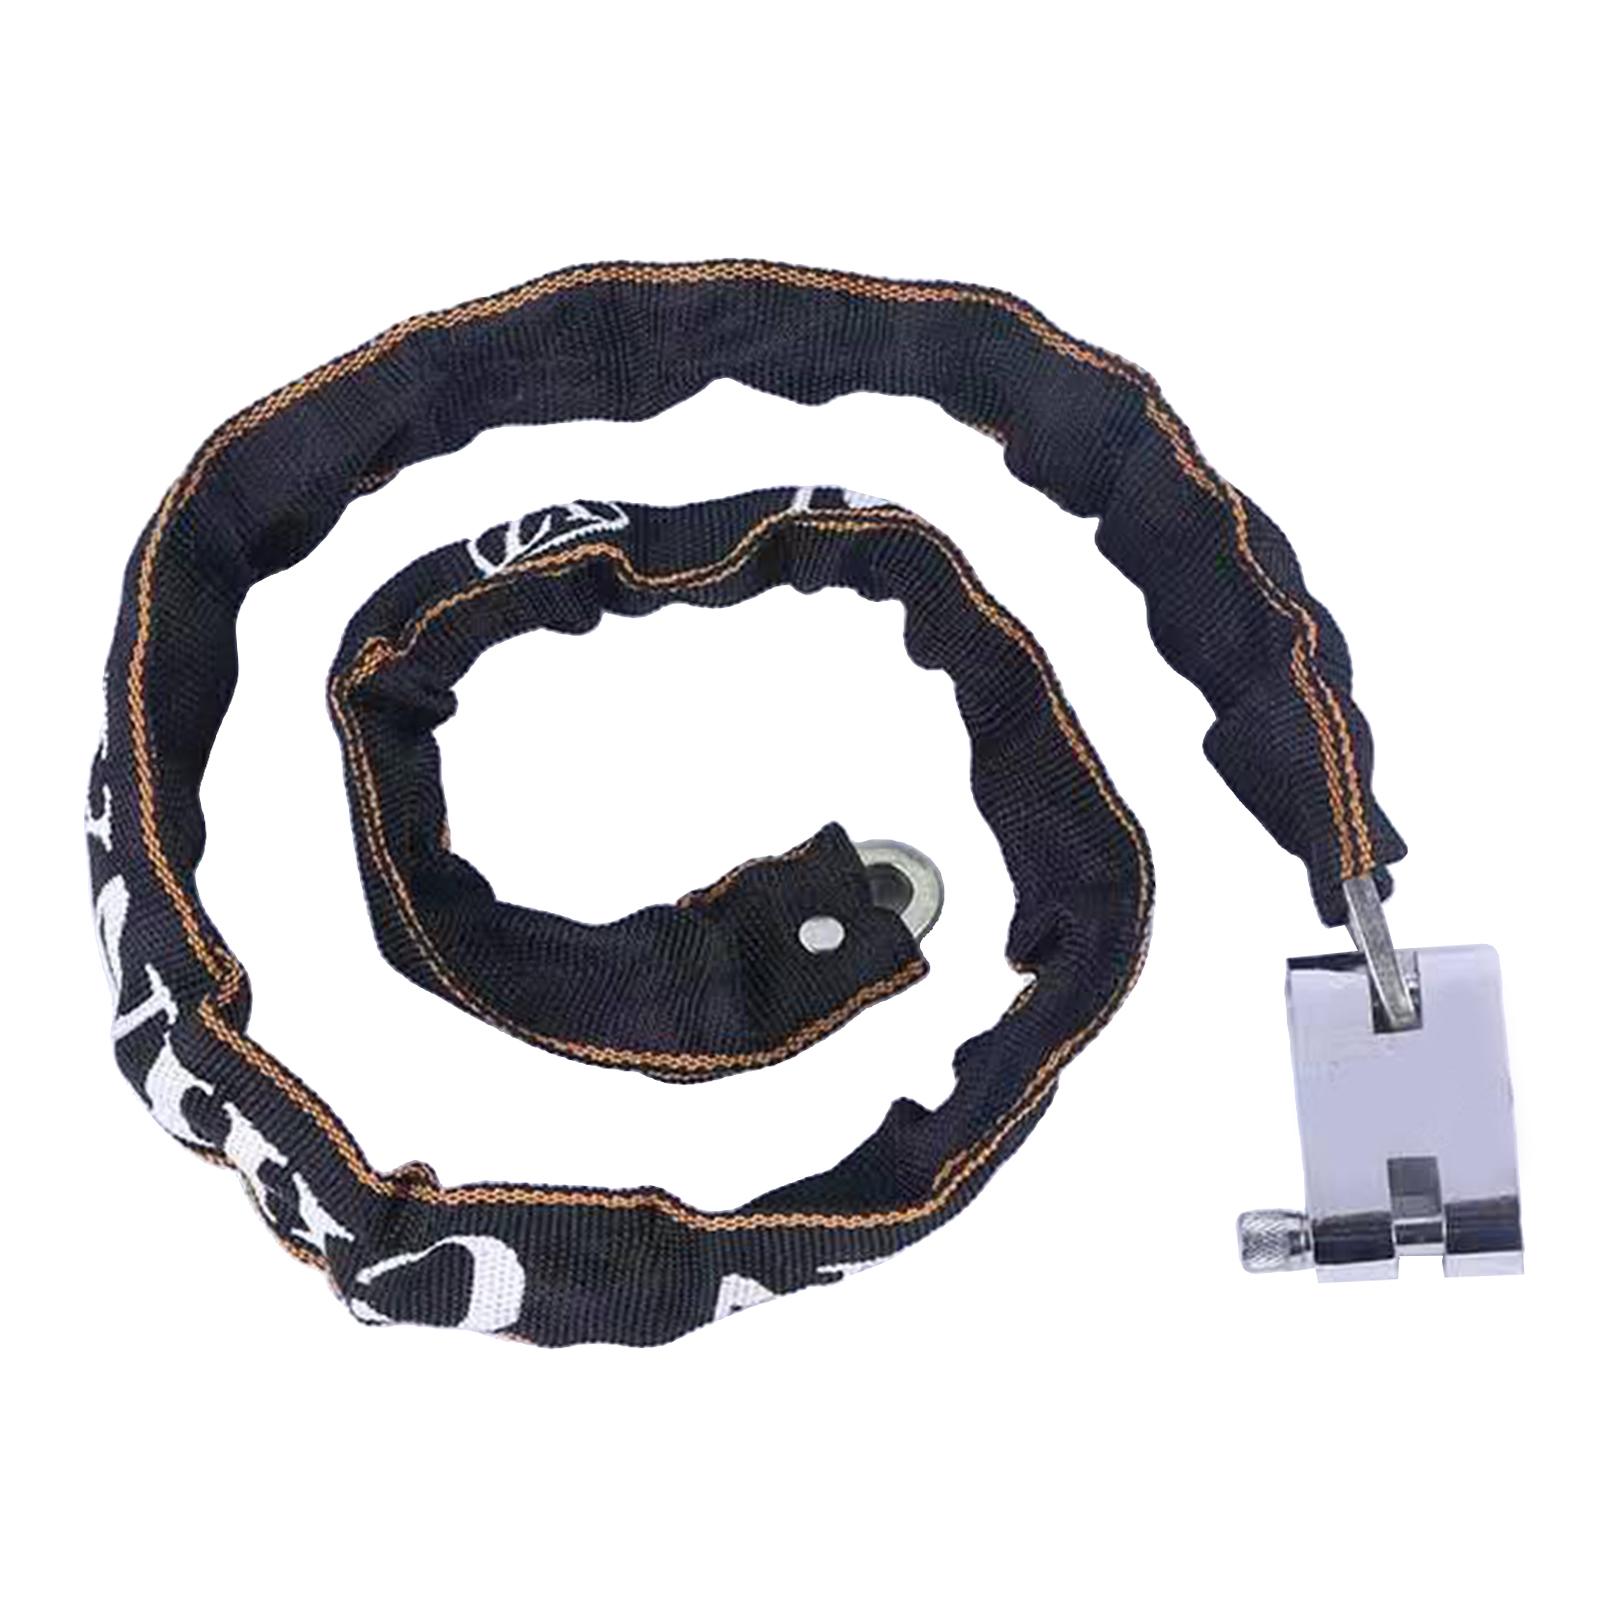 Bicycle Cable Lock Anti-theft Scooter Motorcycle Chain Lock W/ Sleeve 110cm